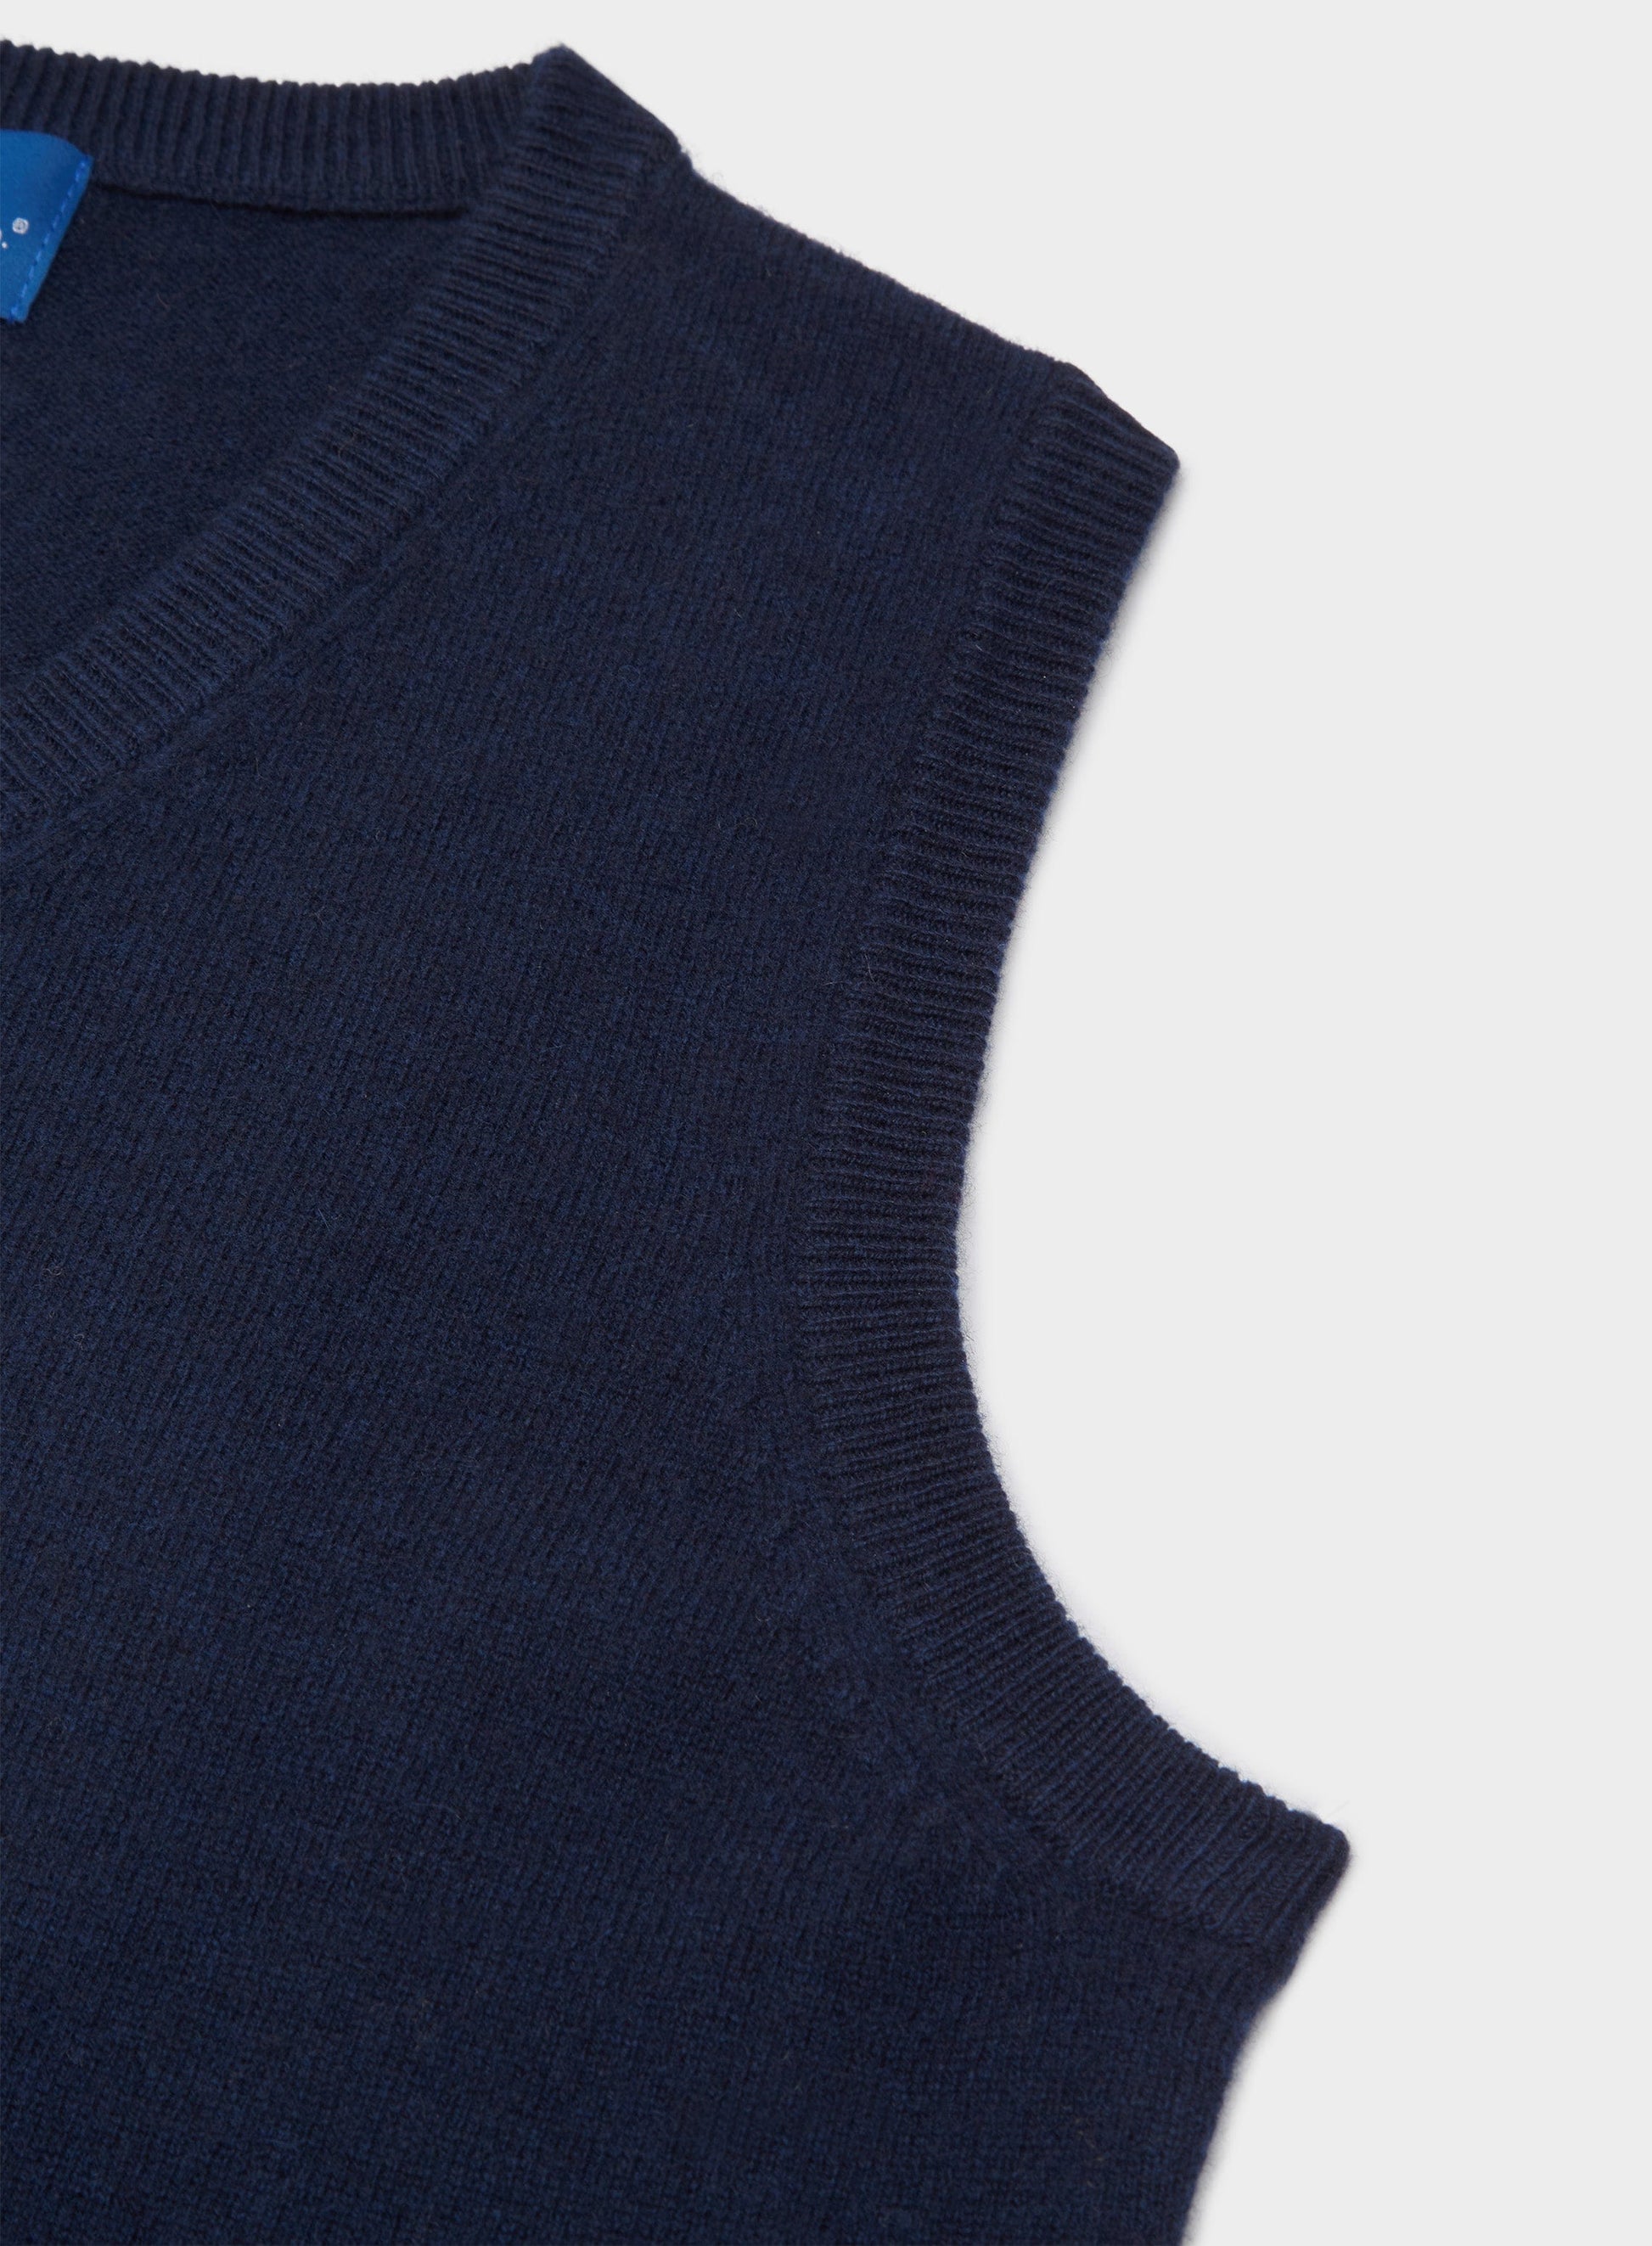 Cashmere Sleeveless in Navy